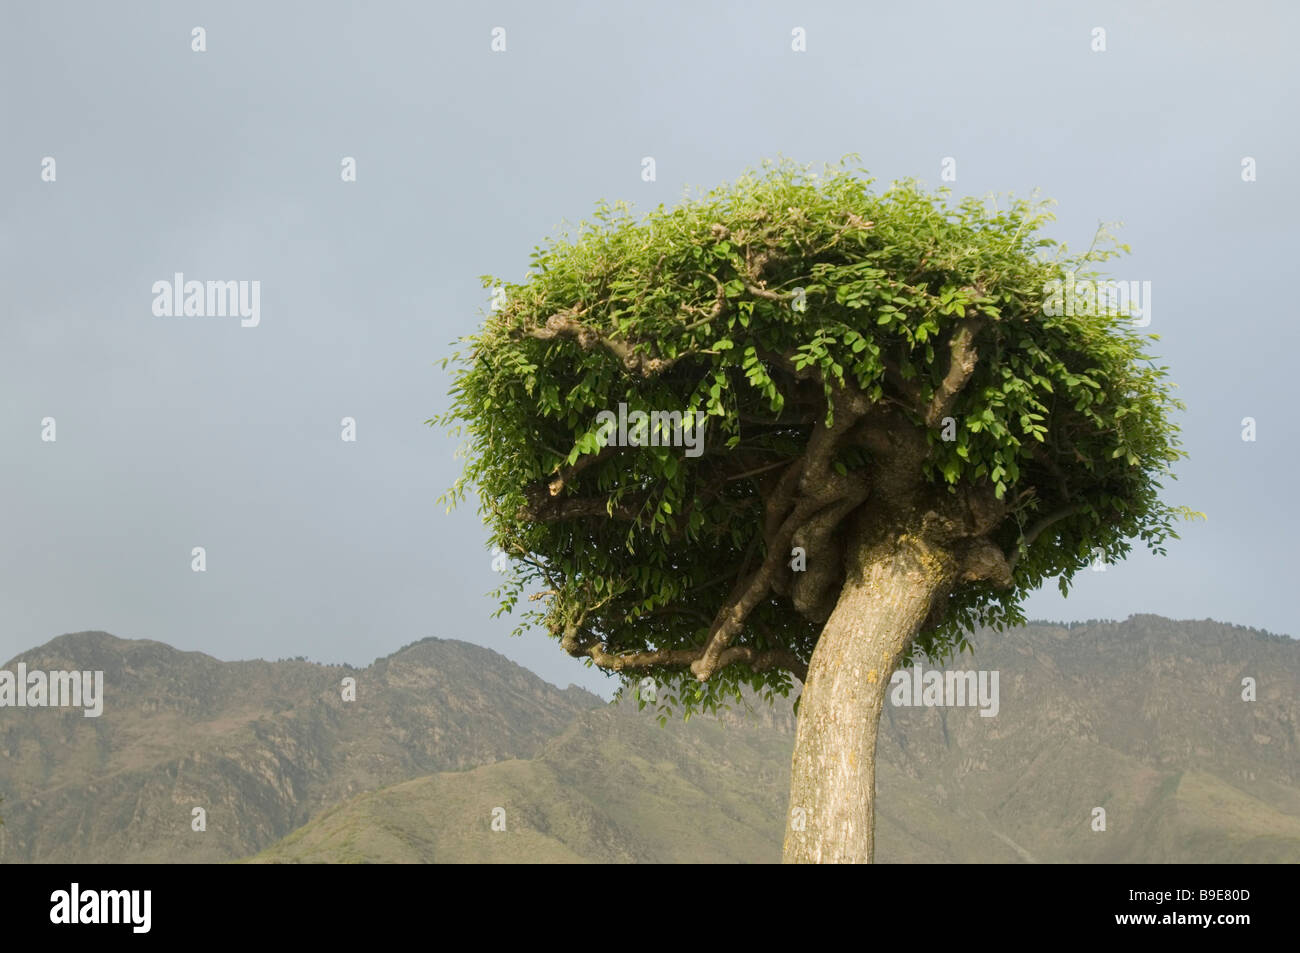 Tree in a garden with a mountain in the background, Nishat Garden, Dal Lake, Srinagar, Jammu And Kashmir, India Stock Photo